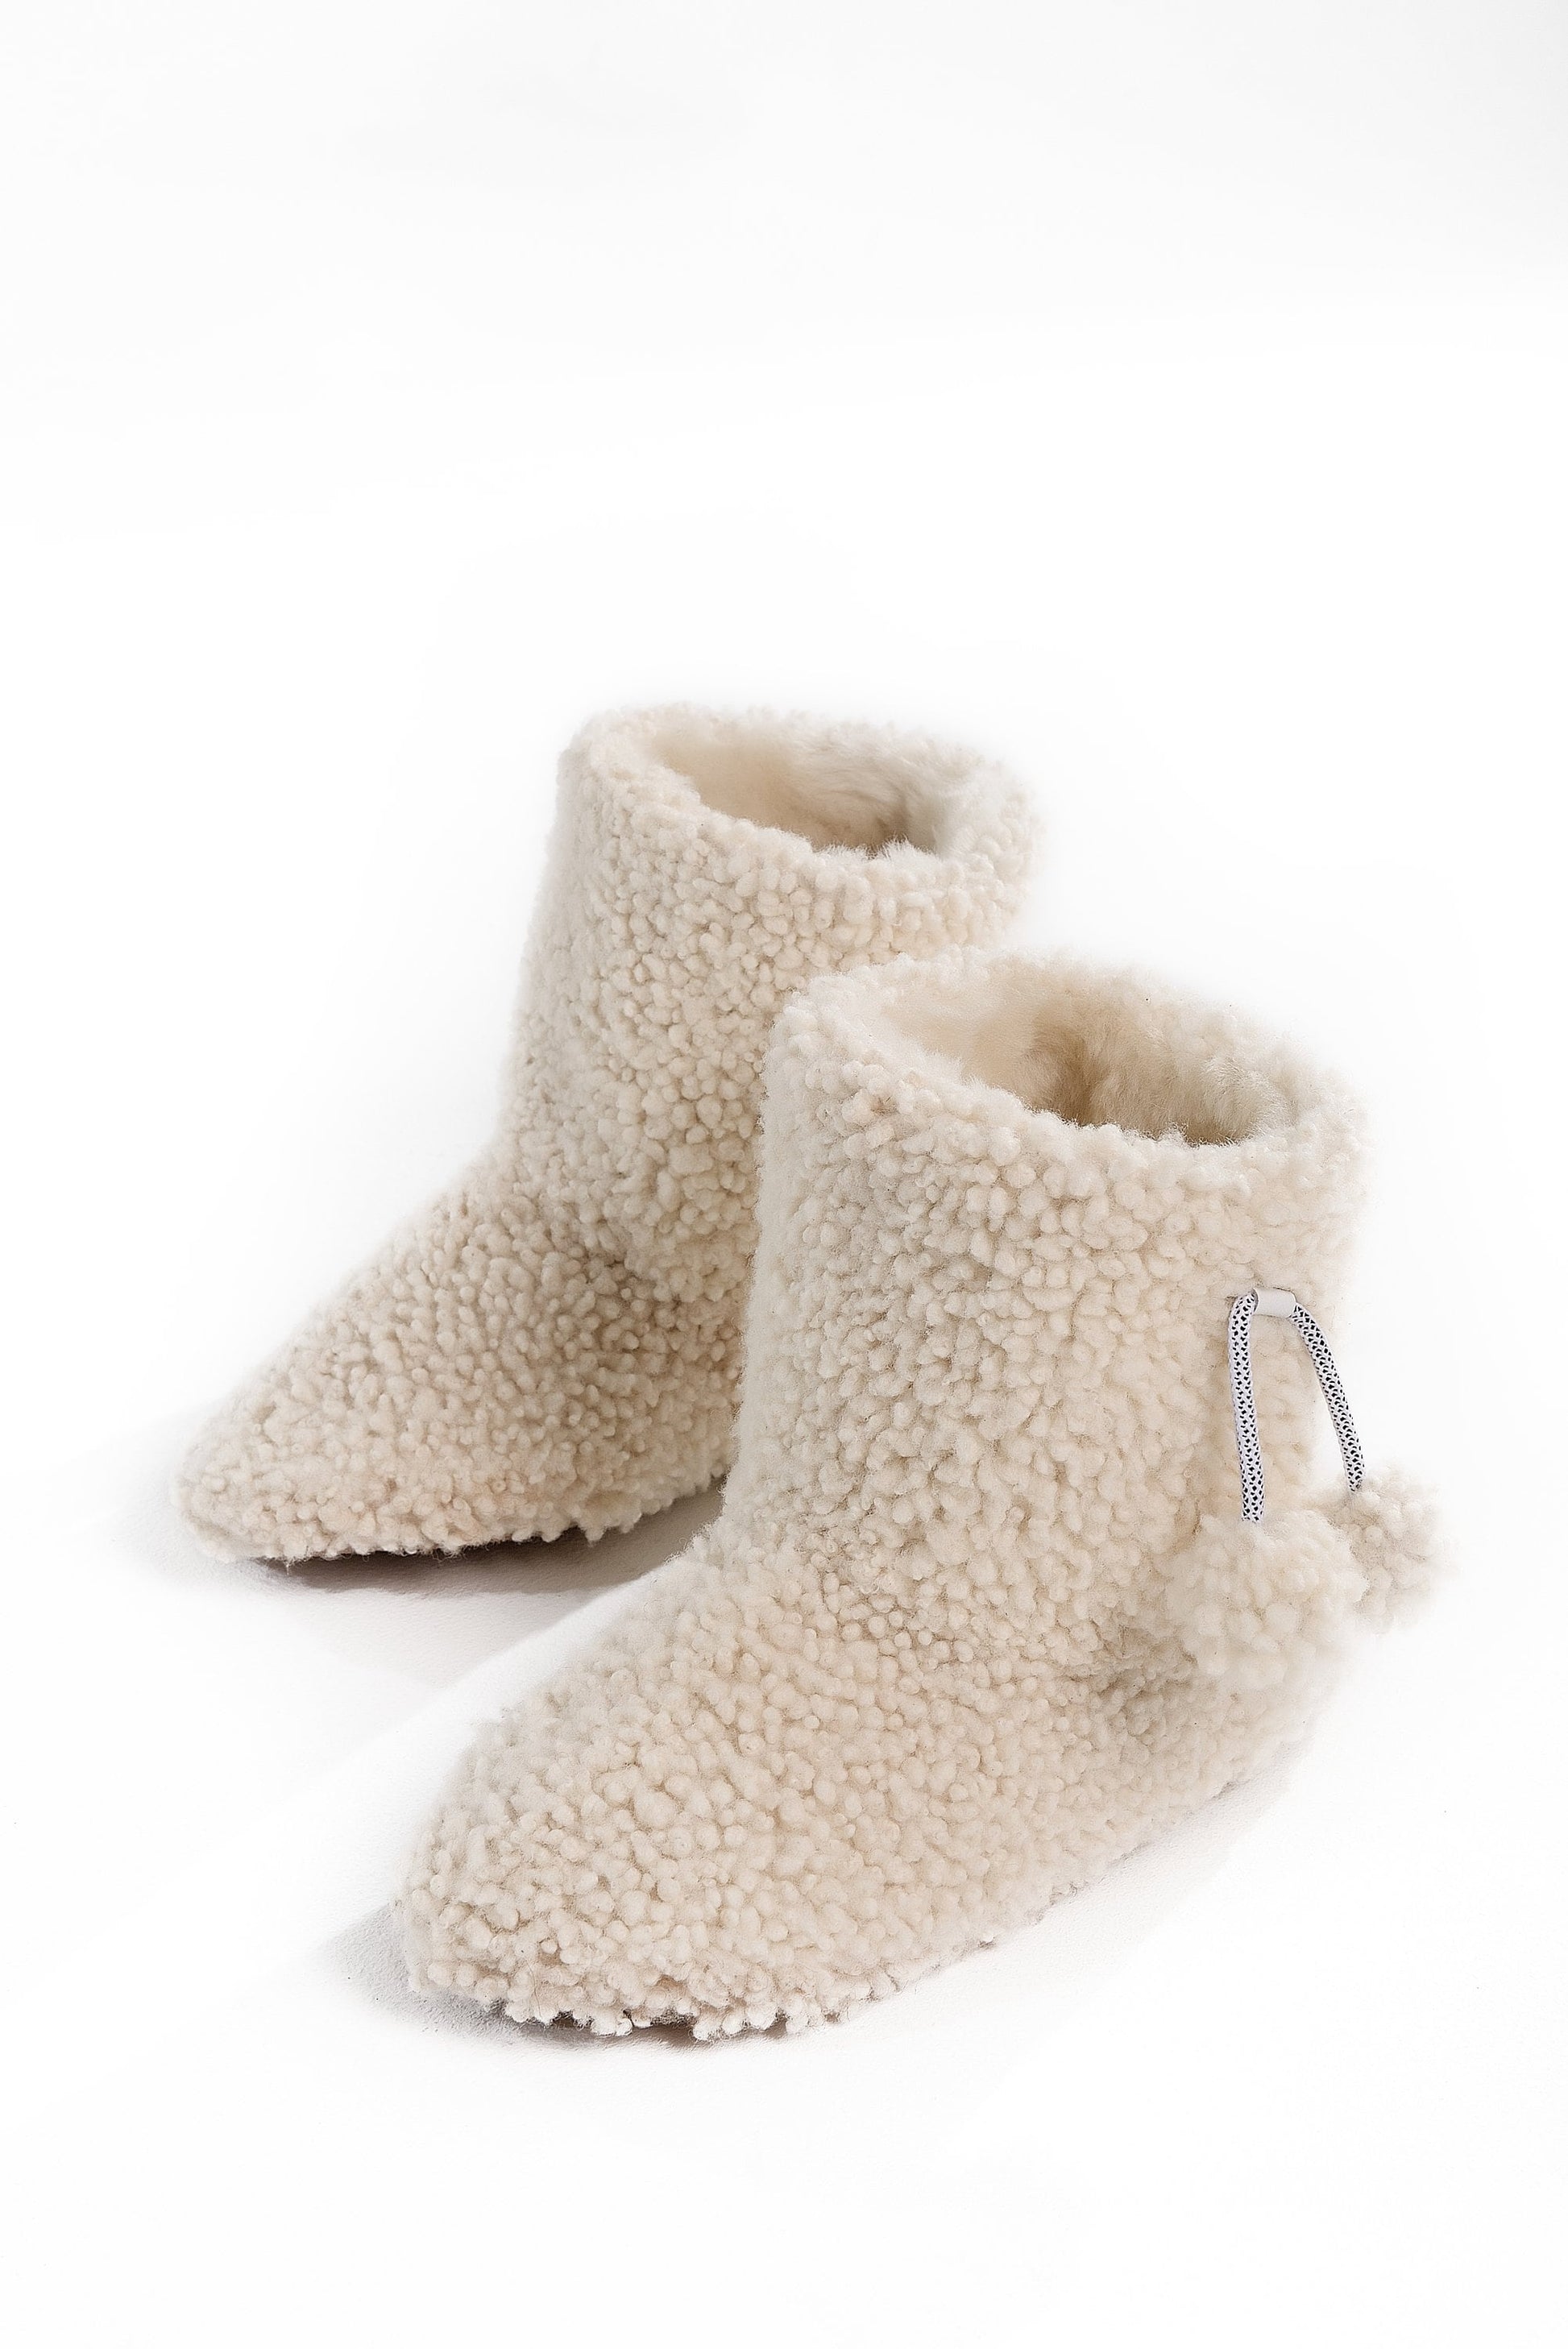 Real Womens Boucle Sheepskin Slipper Home Boots in White Color With Pom Pom